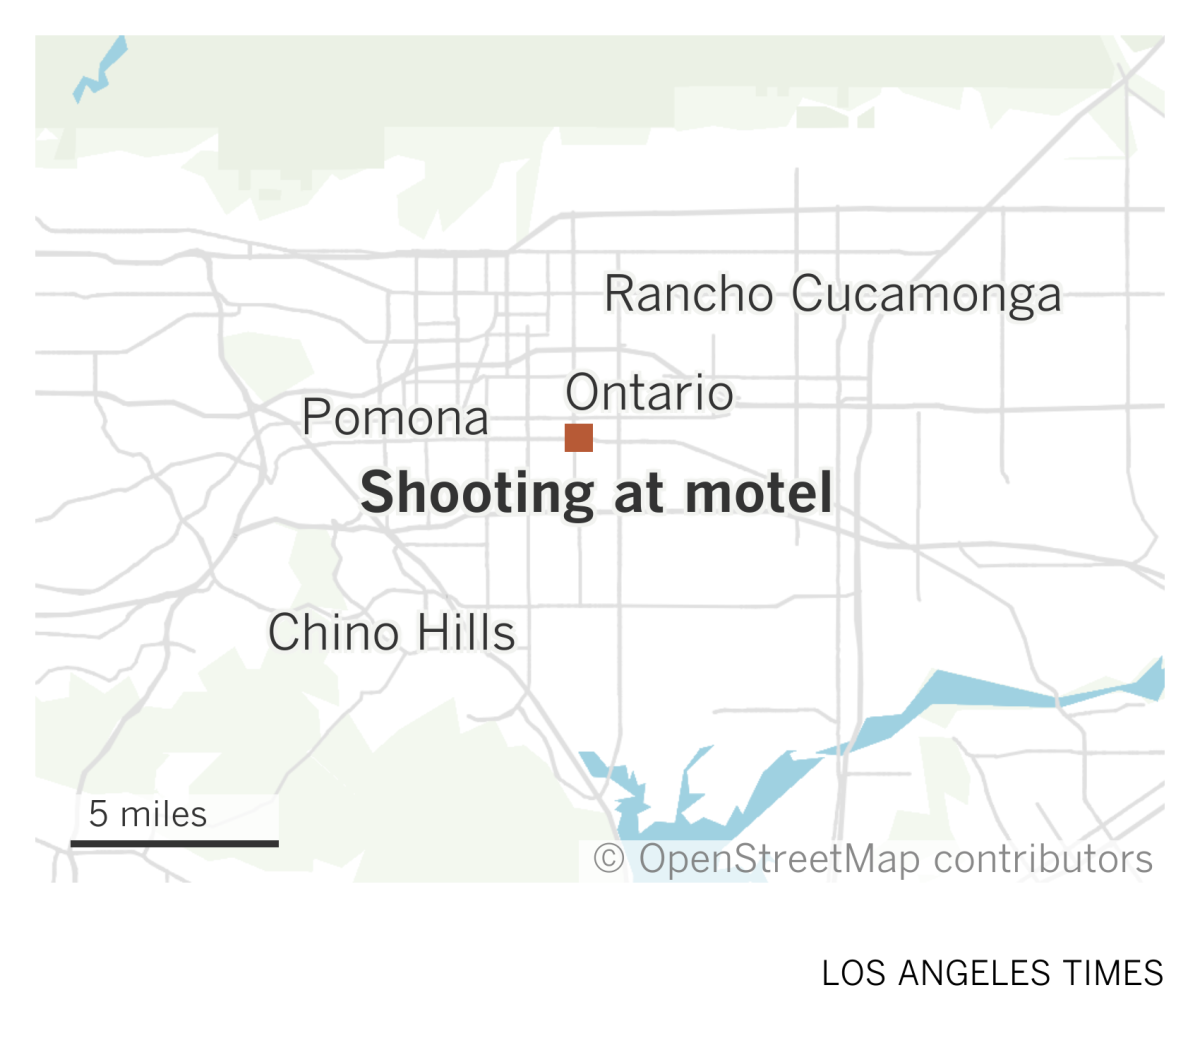 A map shows the location of a shooting at a motel in Ontario, California